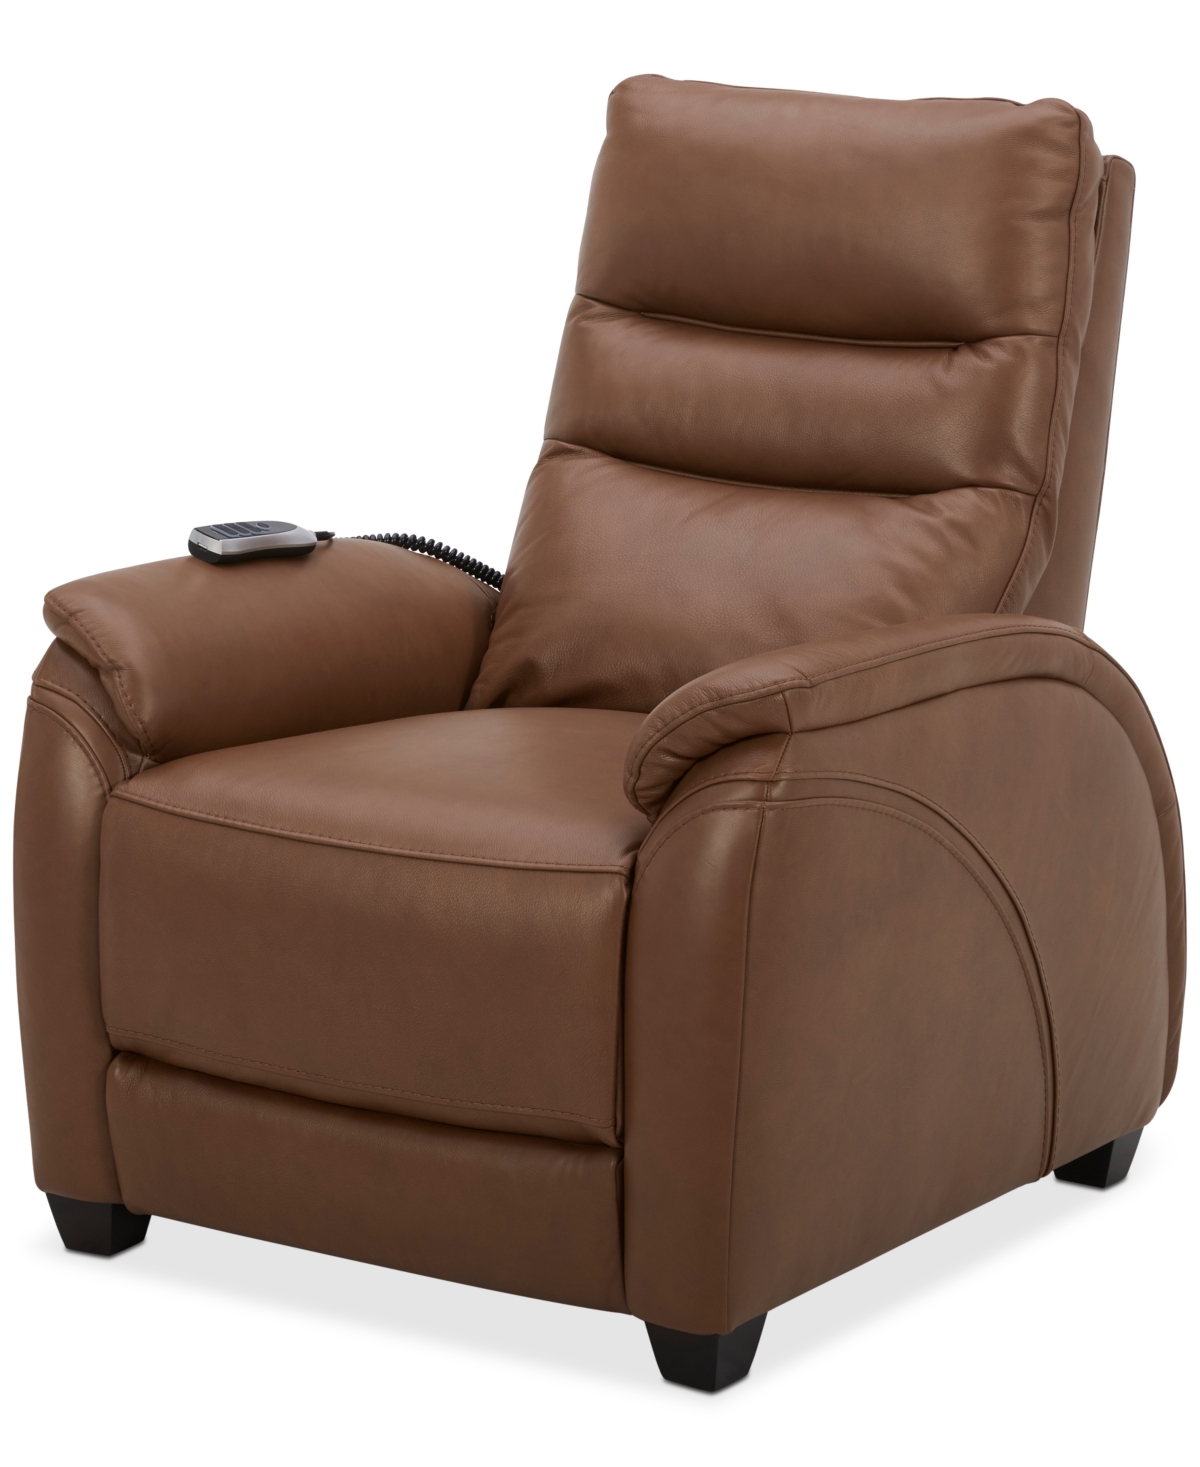 Furniture Korbin 33" Zero Gravity Leather Recliner, Created For Macy's In Saddle